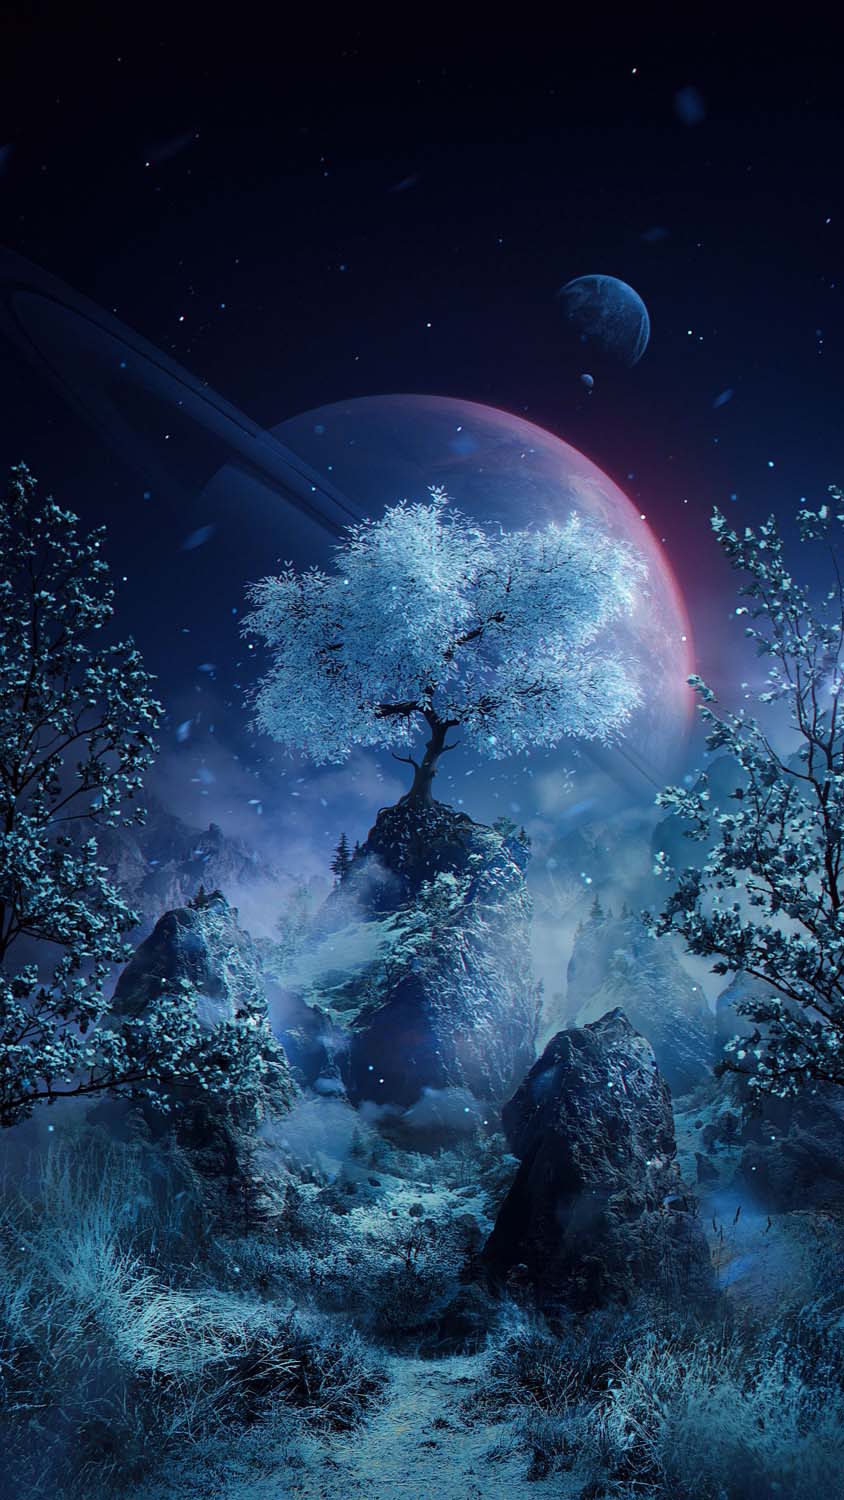 Space Tree 4K IPhone Wallpaper HD - IPhone Wallpapers : iPhone Wallpapers